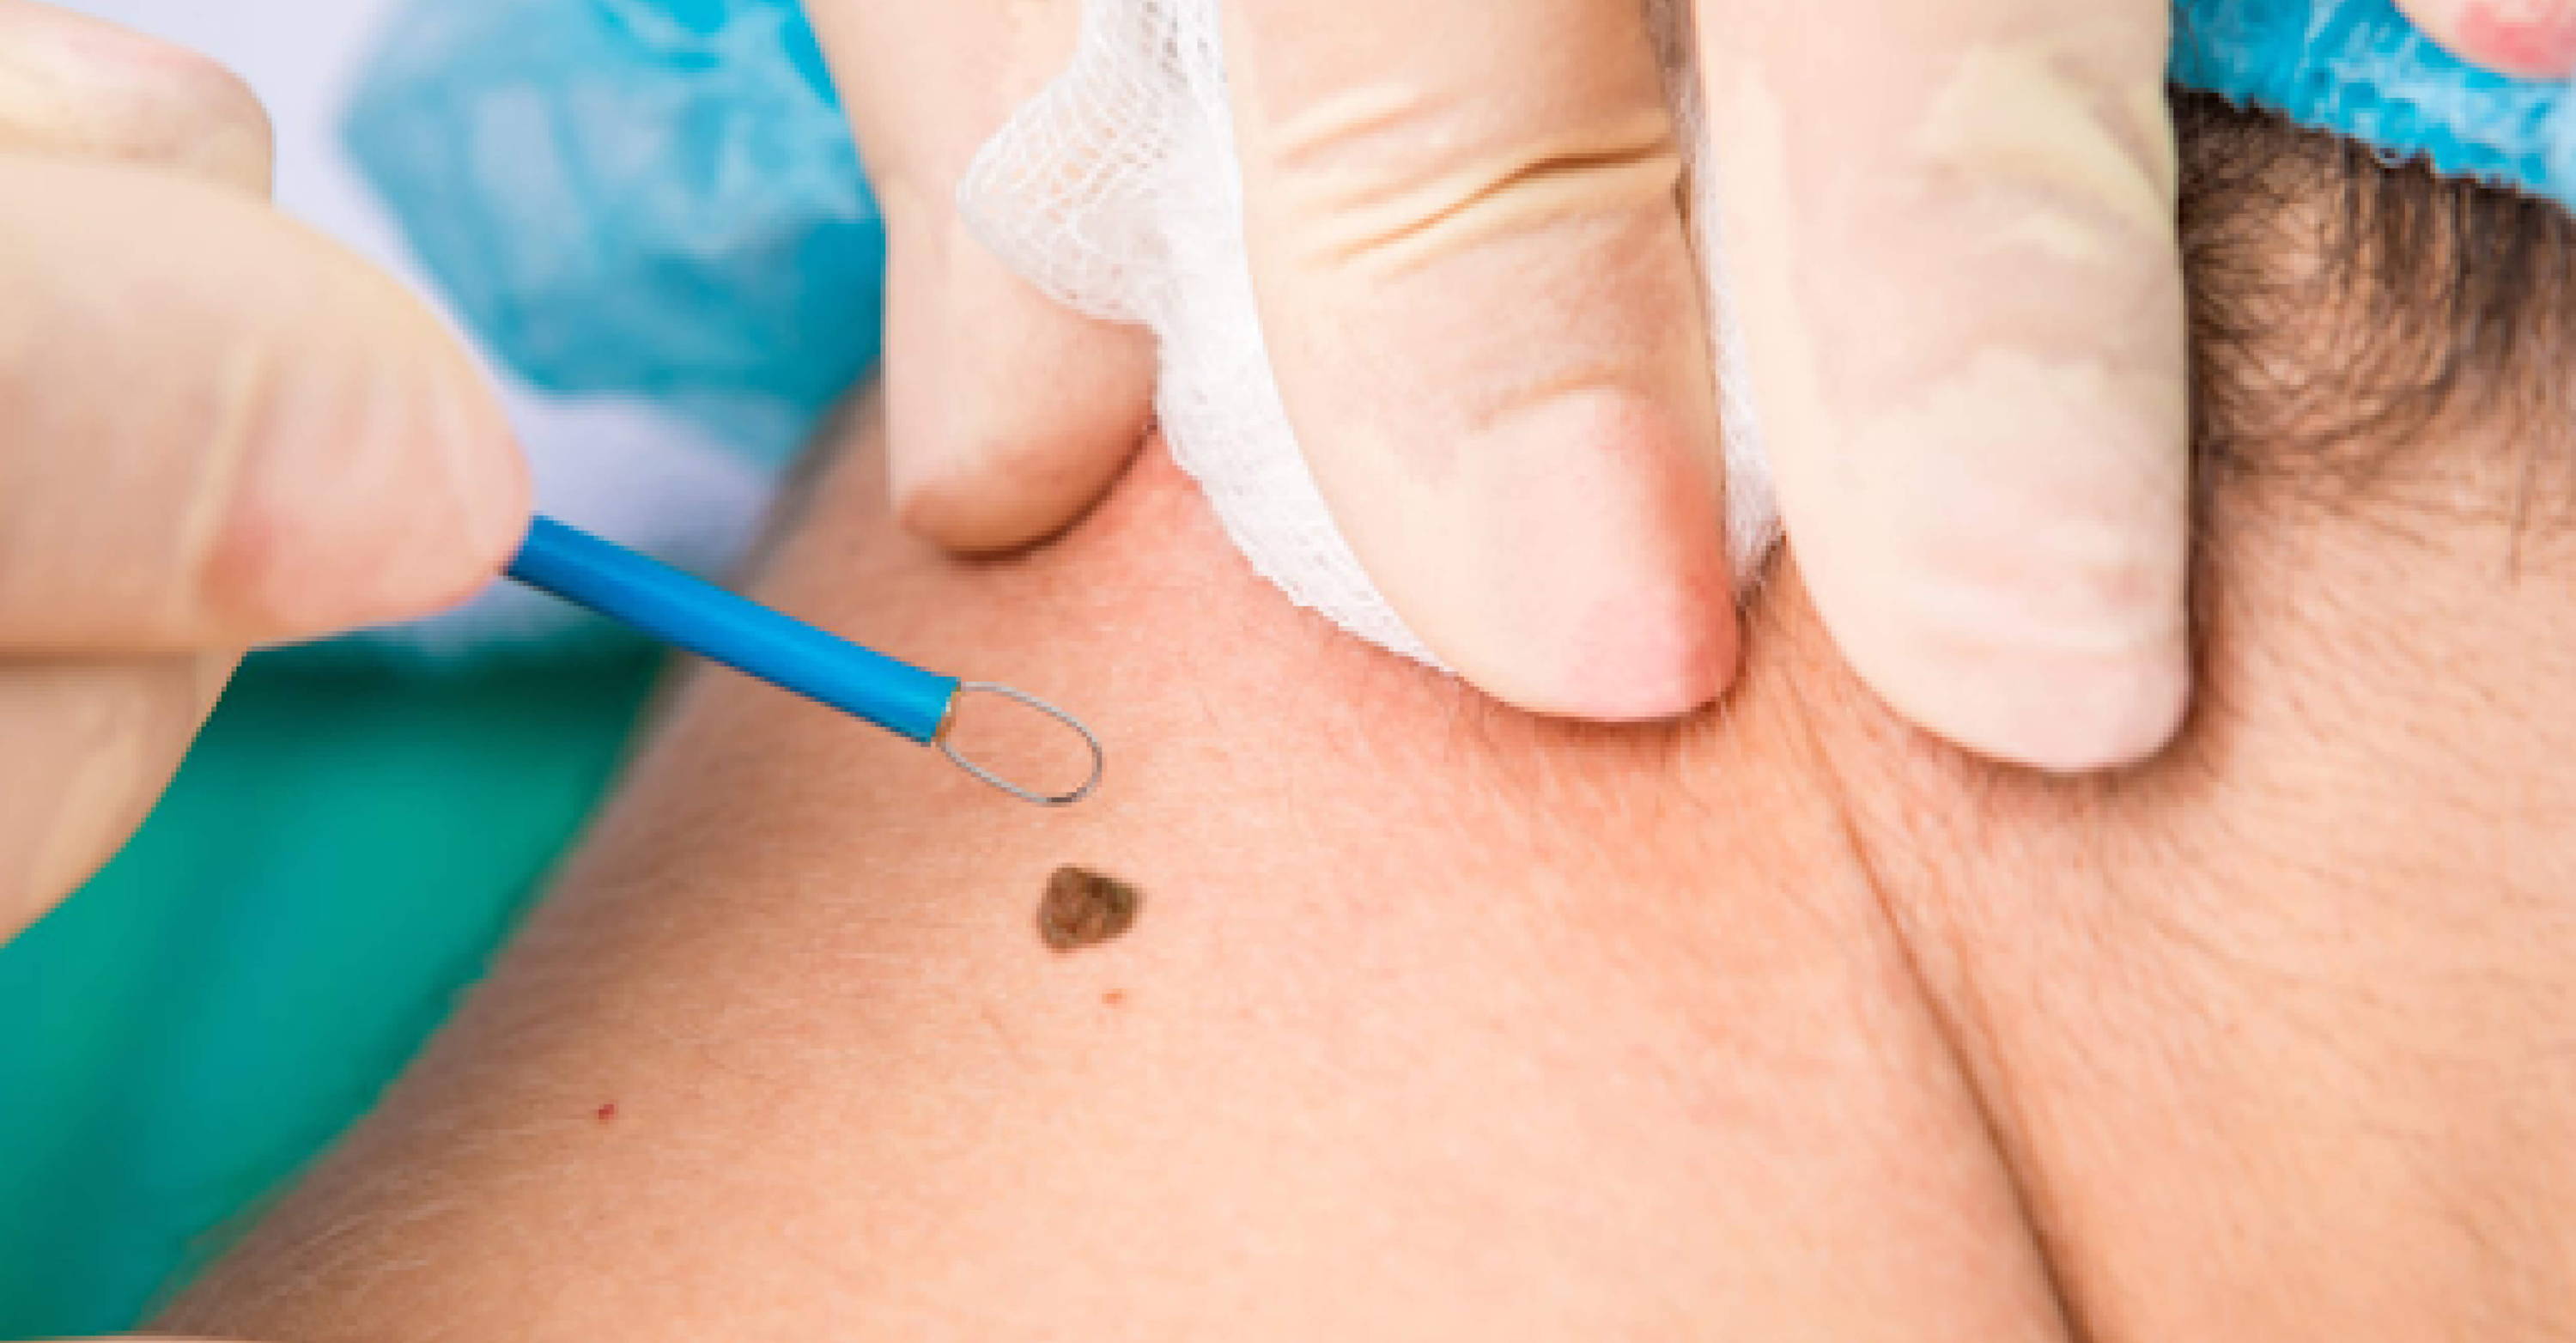 Cauterization and Electrocautery for skin tag removal